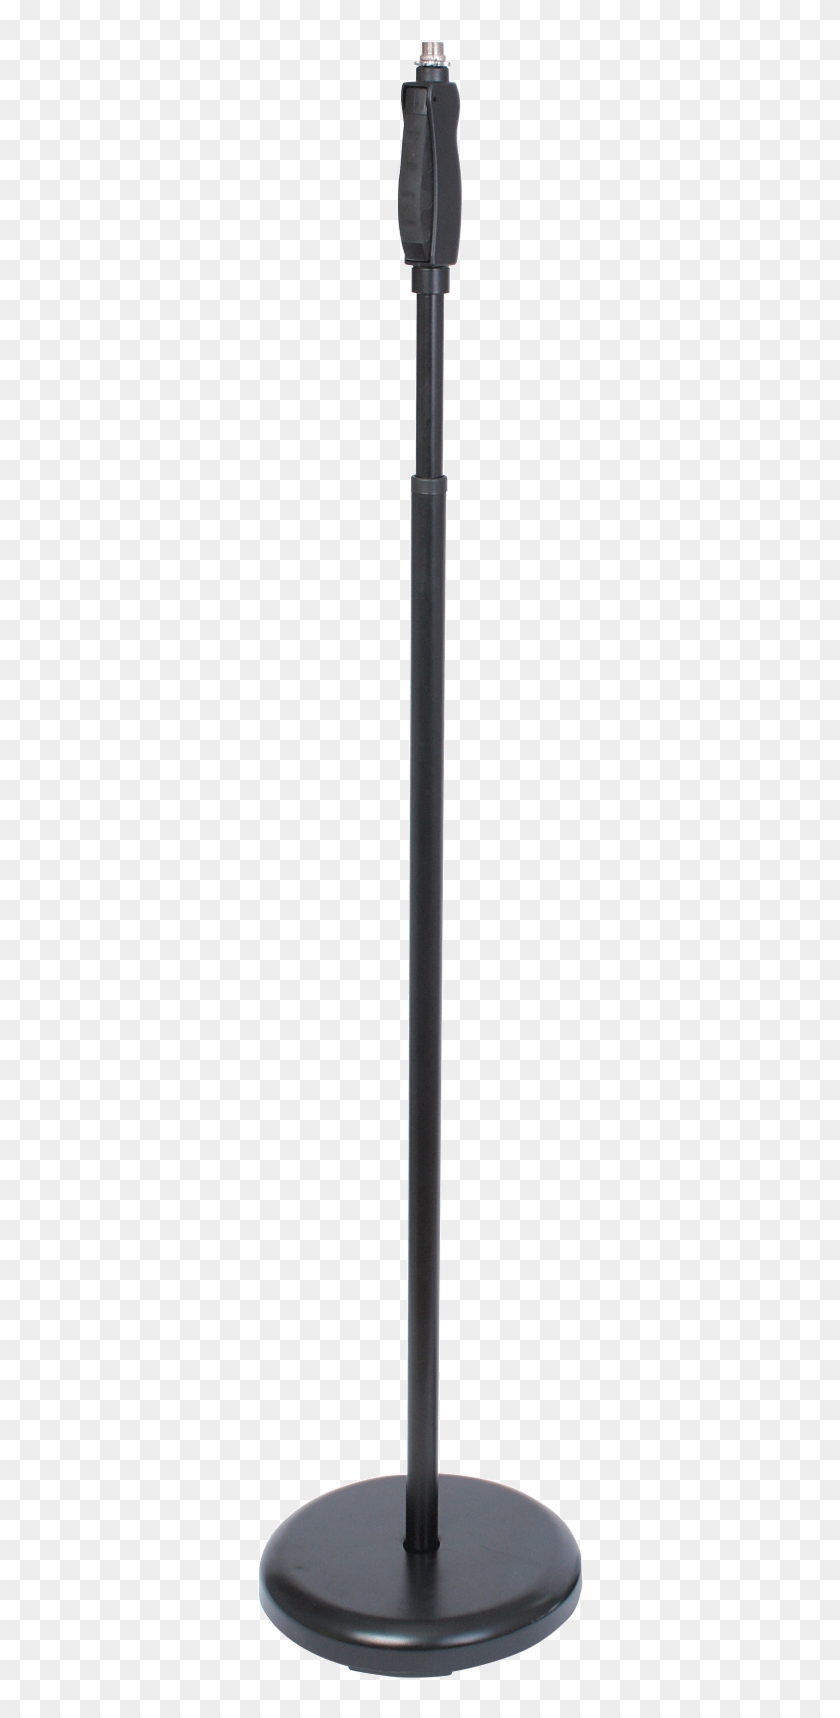 Black Microphone Stand - Smartphone Clipart #3992123